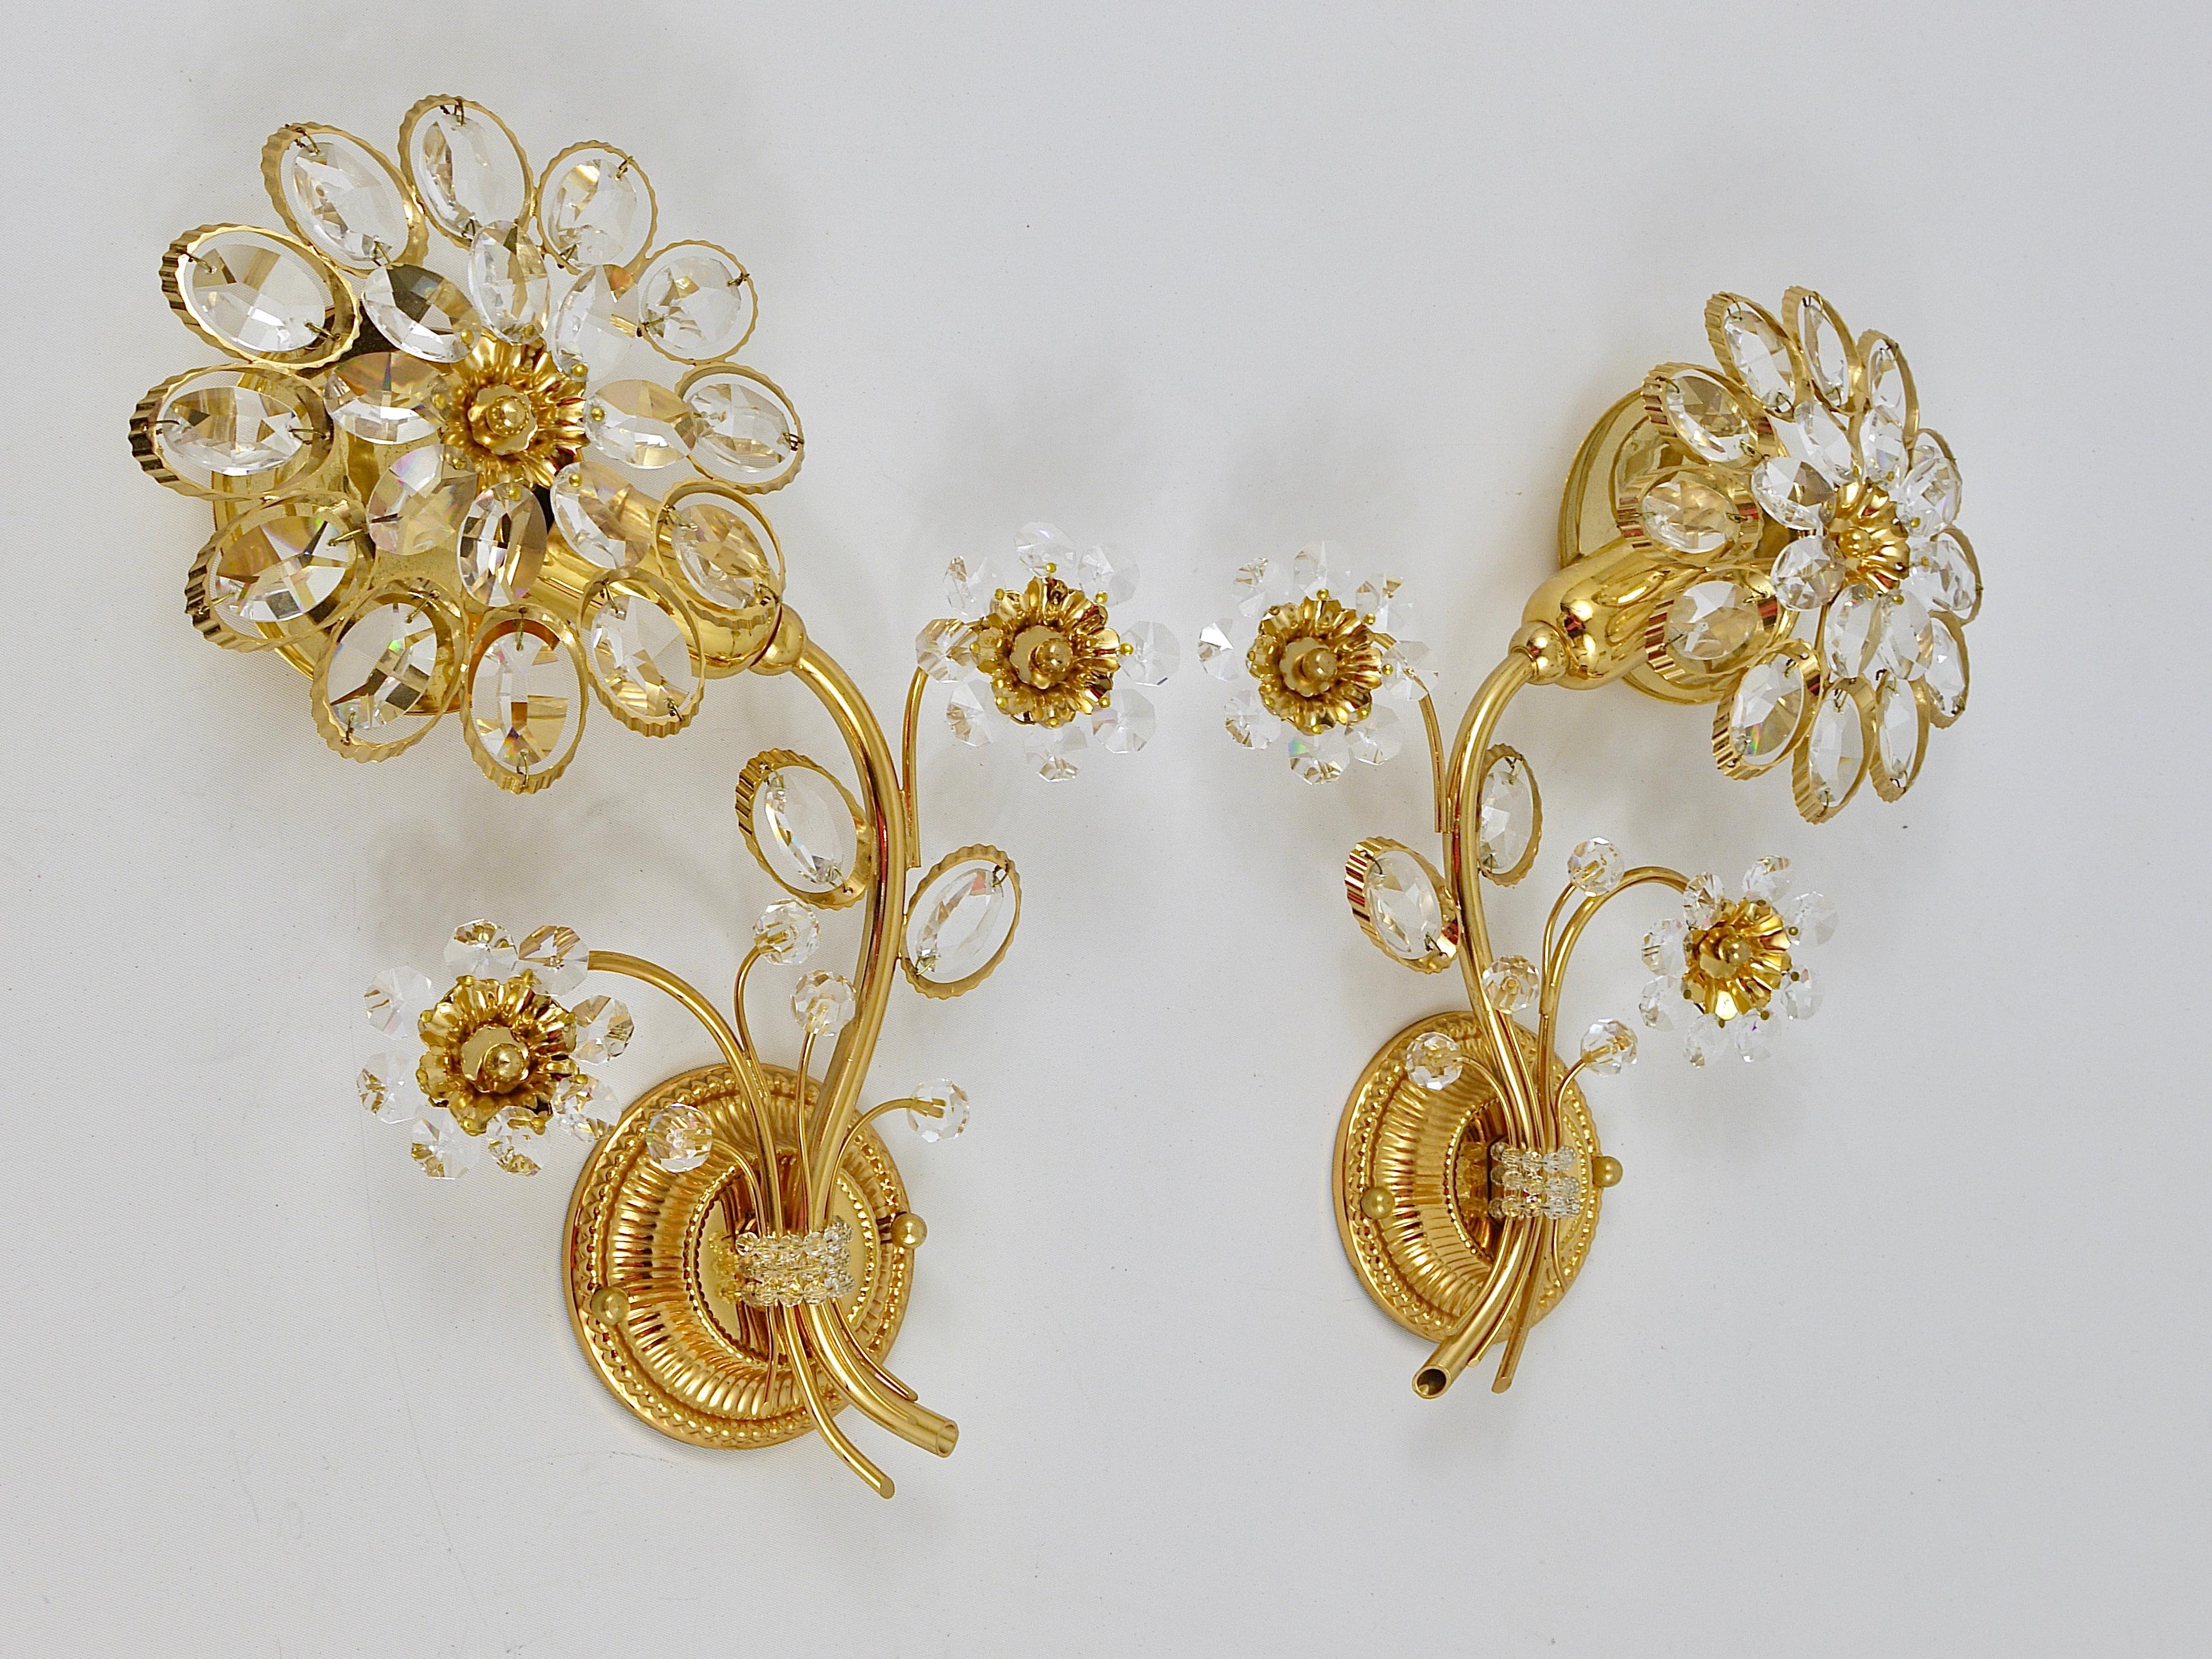 Pair of Palwa Gilt Brass Flower Wall Lights with Crystals, Germany, 1970s For Sale 5